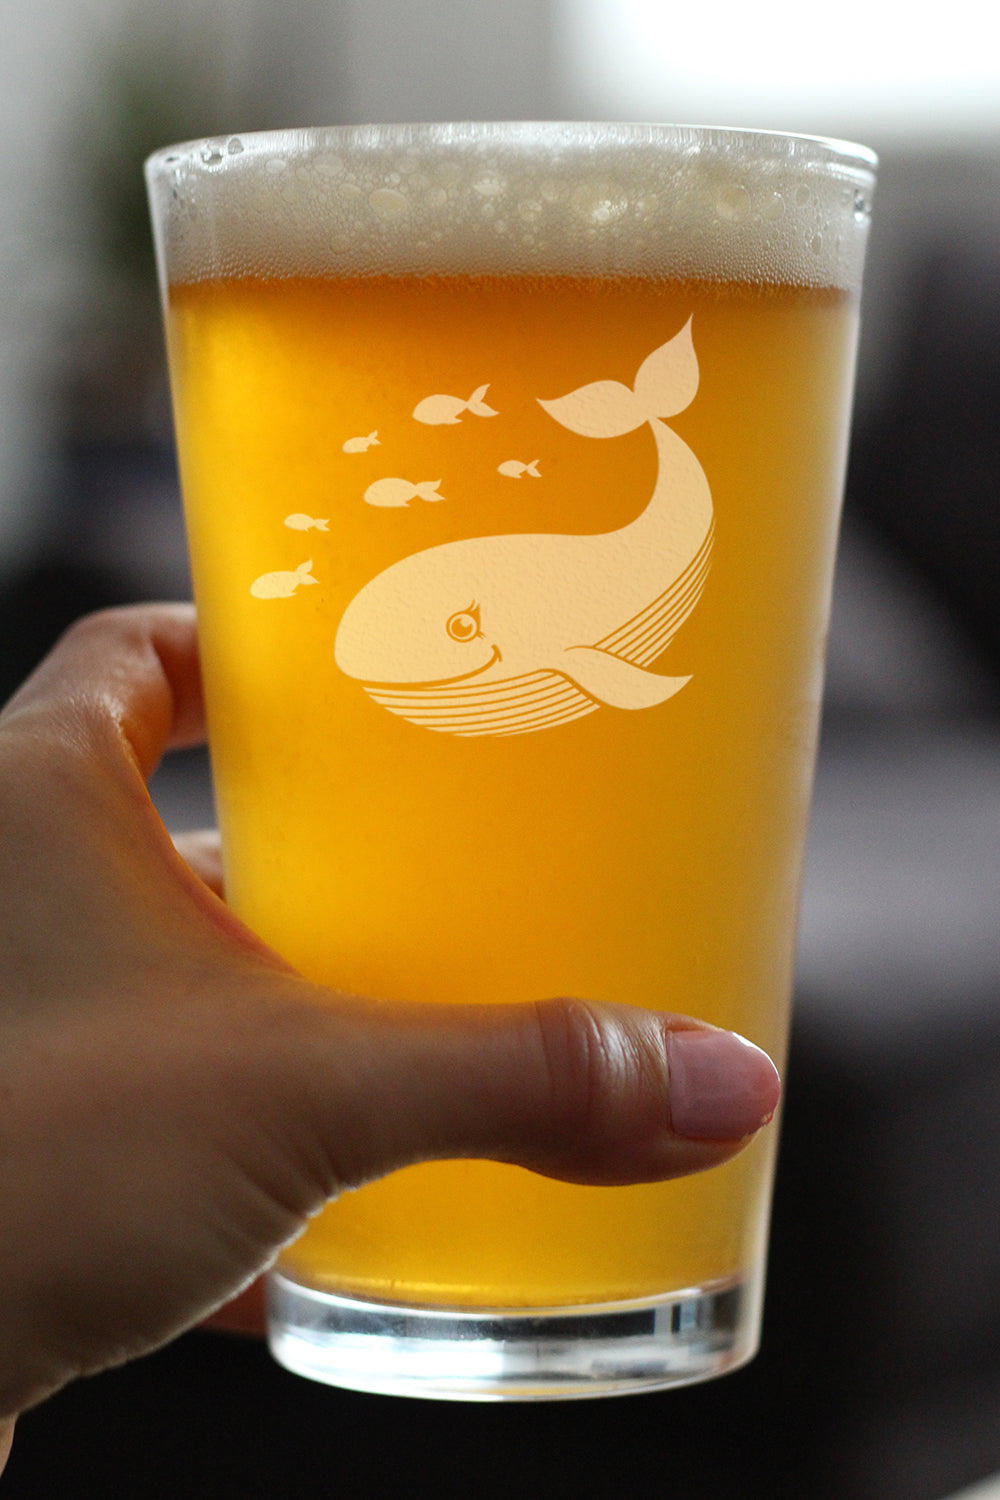 Cute Whale Pint Glass for Beer - Beach Themed Decor and Gifts for Whale Lovers - 16 Oz Glasses